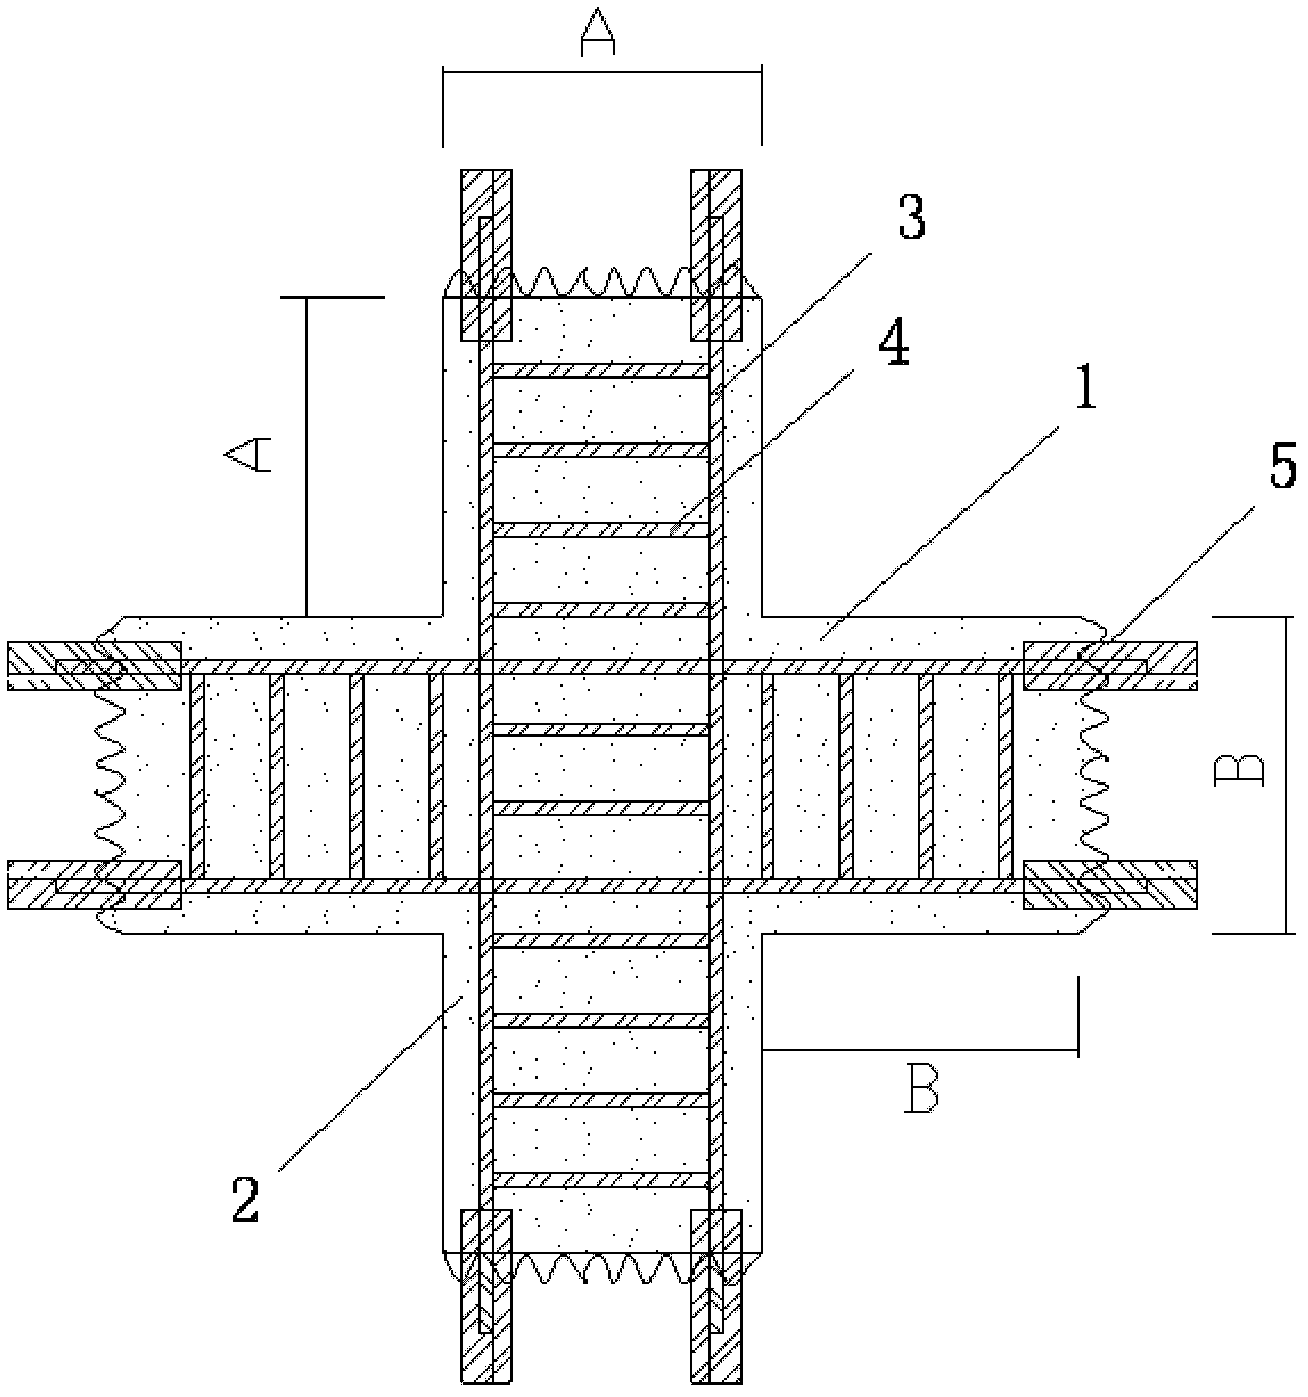 Prefabricated combined beam and column node member